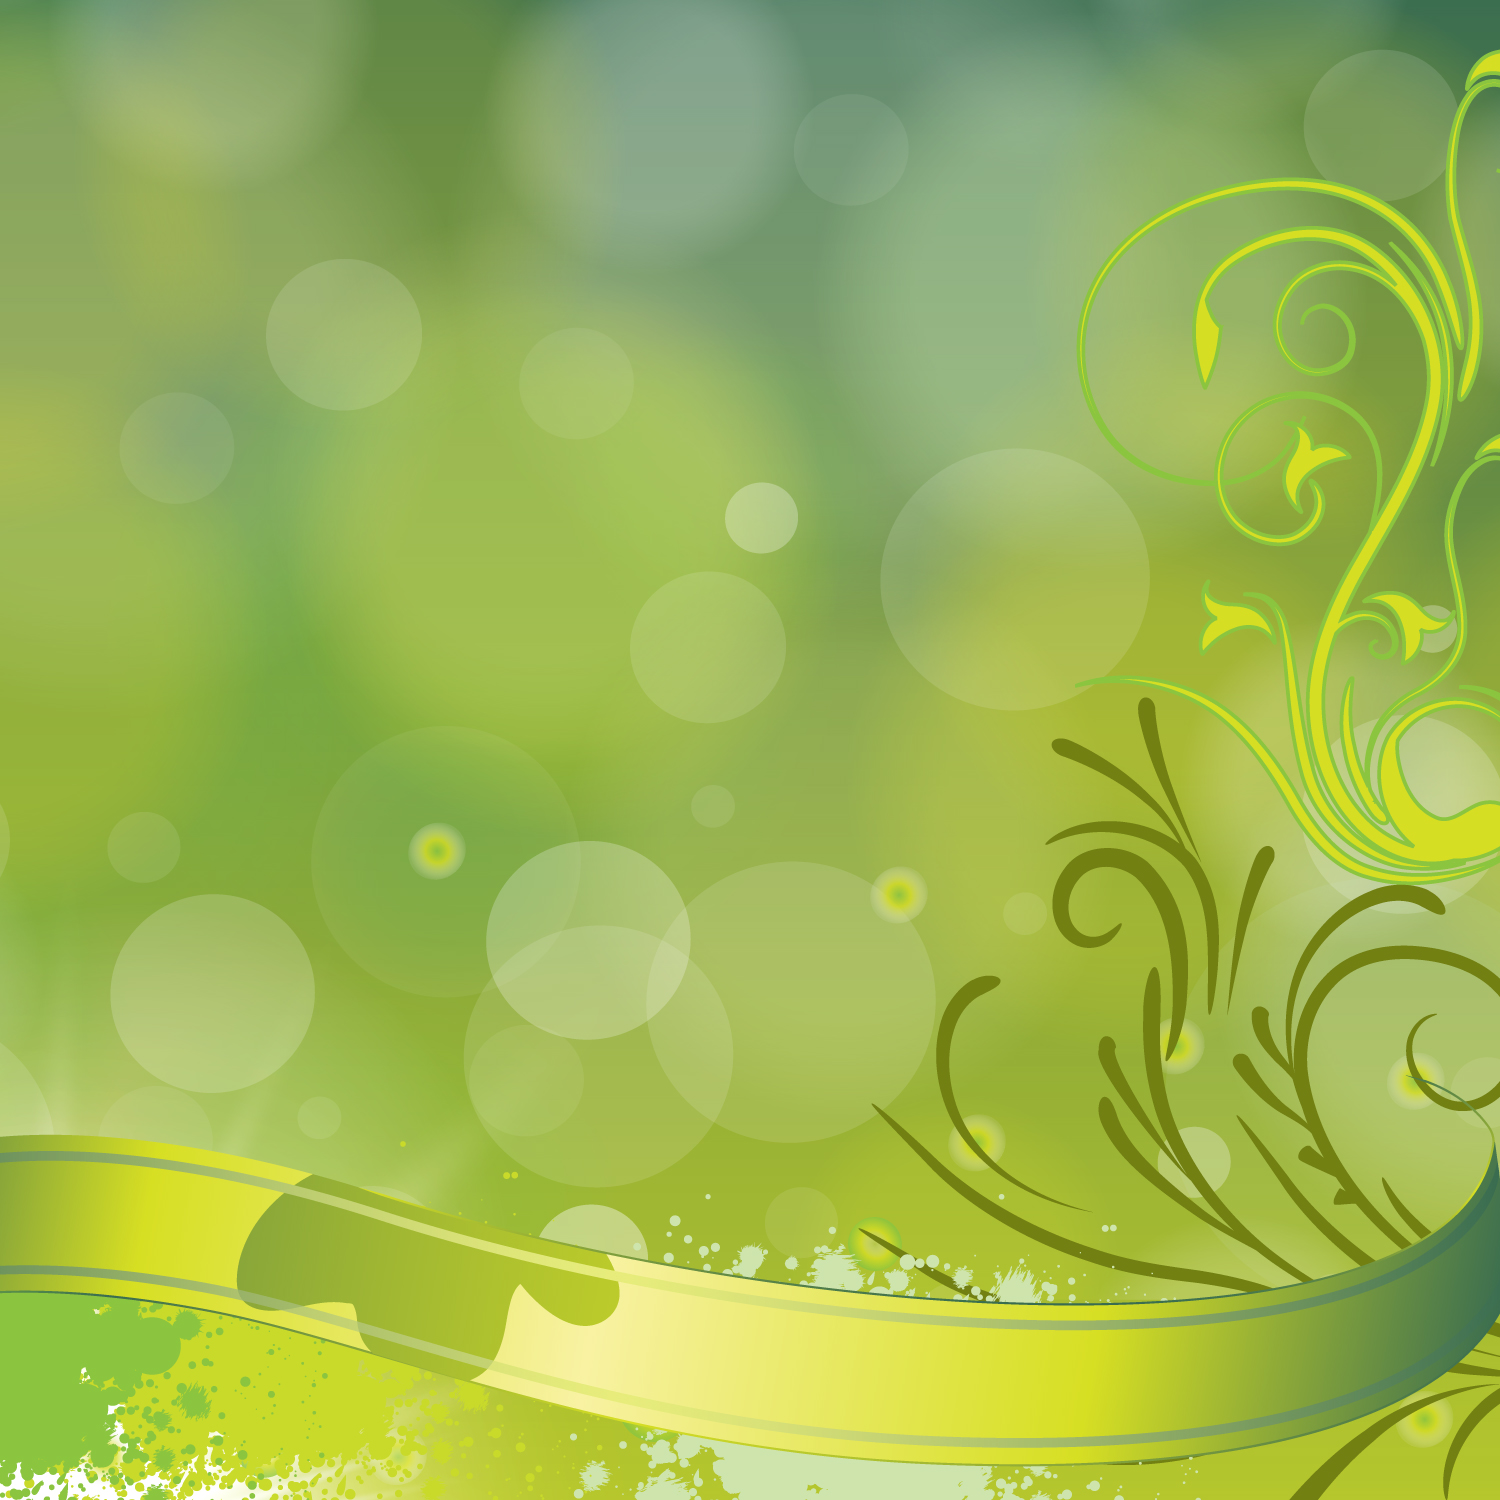 Green Floral Vector Background